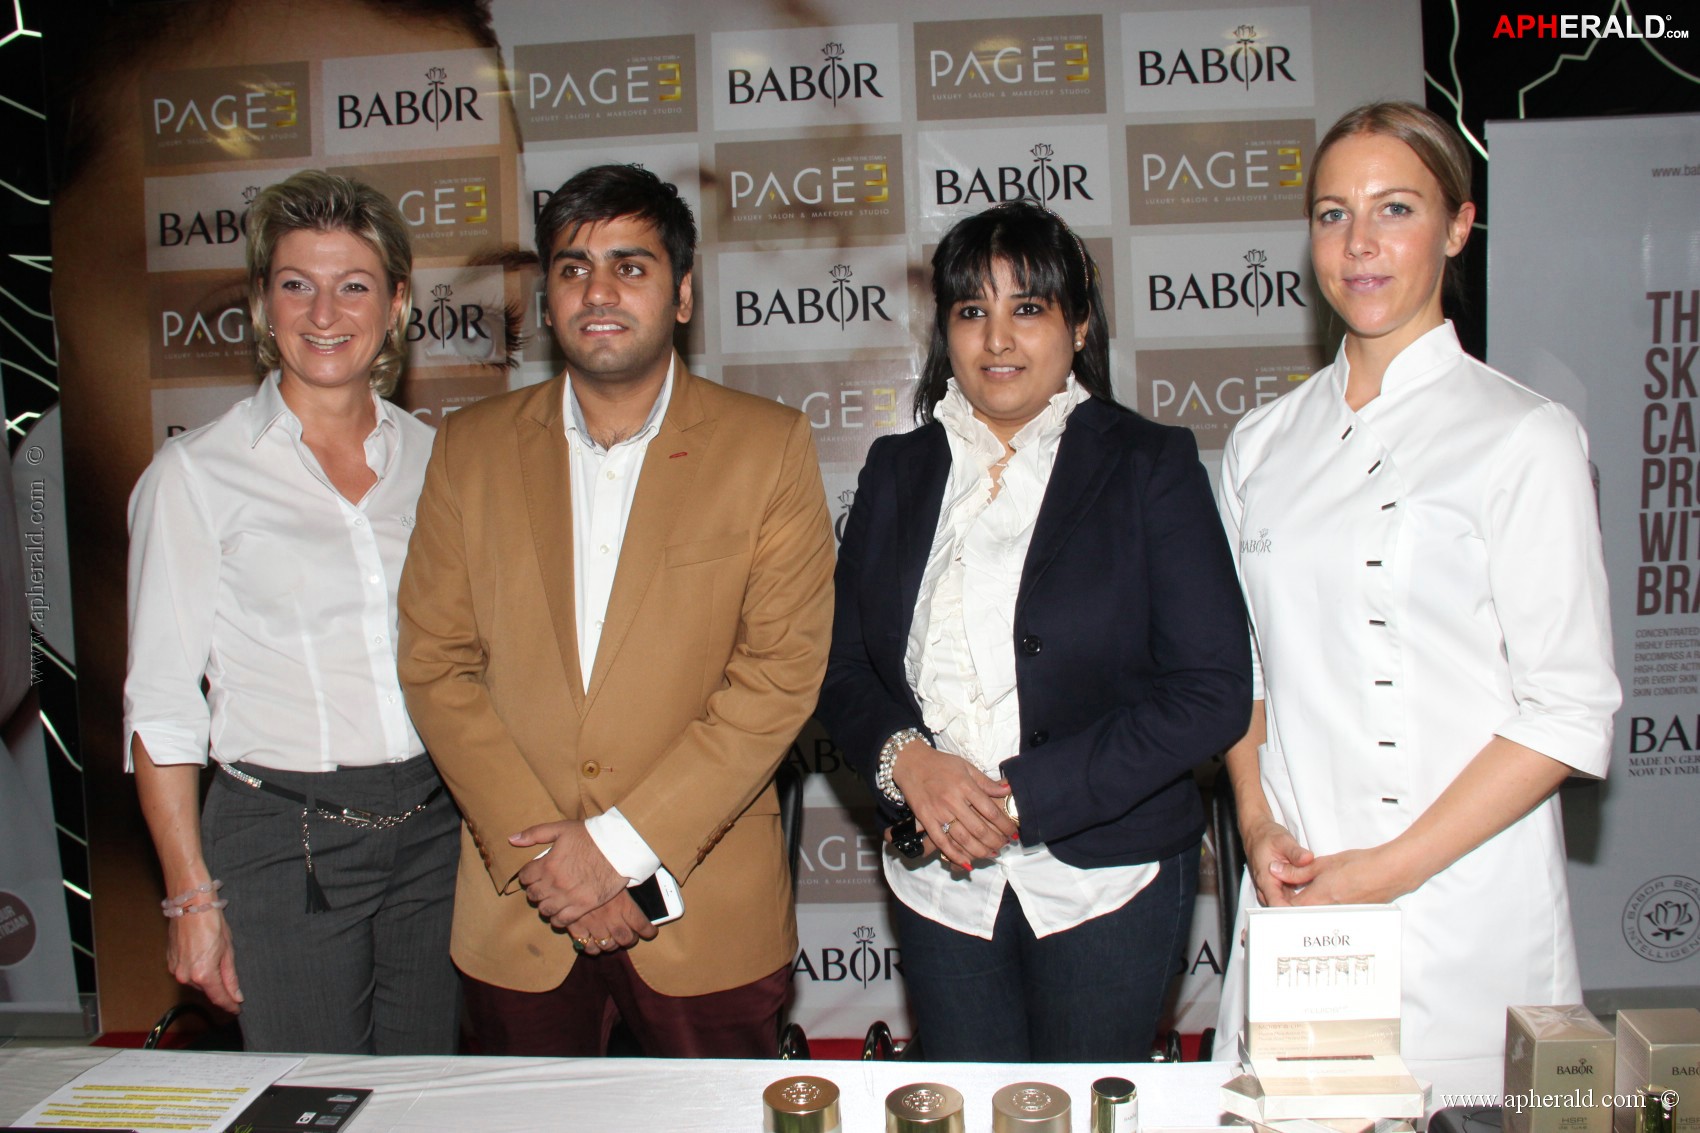 PAGE 3 Luxury Salon launched 'BABOR'